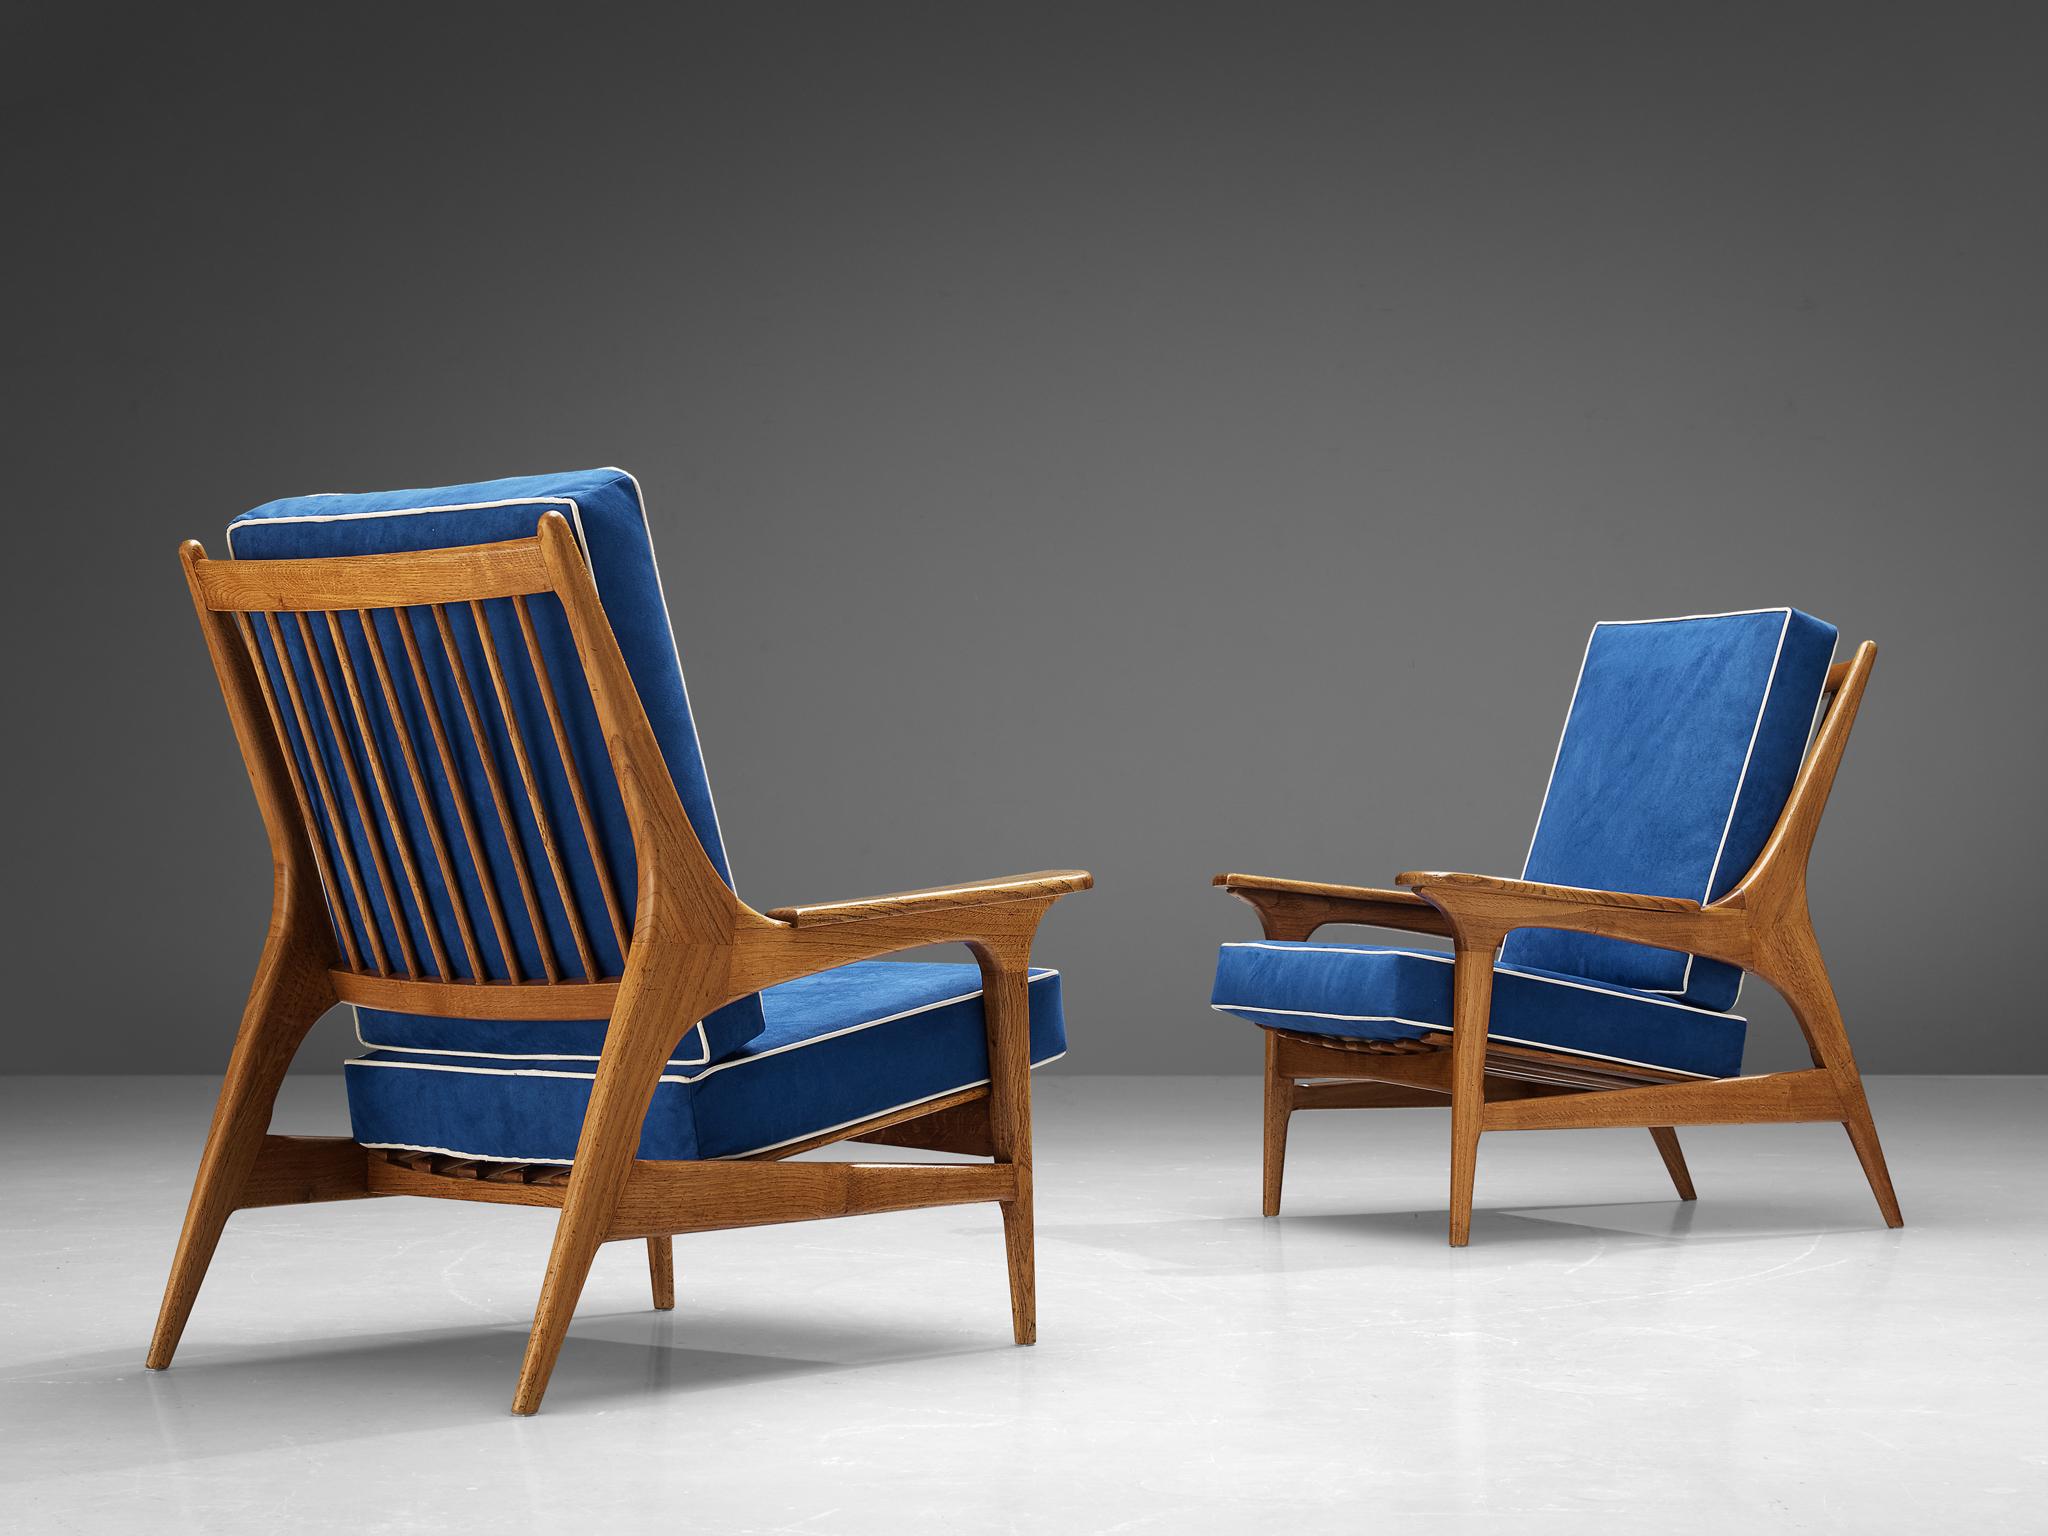 Pair of lounge chairs, oak, alcantara, Italy, 1960s

This striking pair of lounge chairs comes with an eye-catching sea blue alcantara upholstery, giving the room a vibrant and lively touch. The blue color perfectly matches the wood and emphasizes